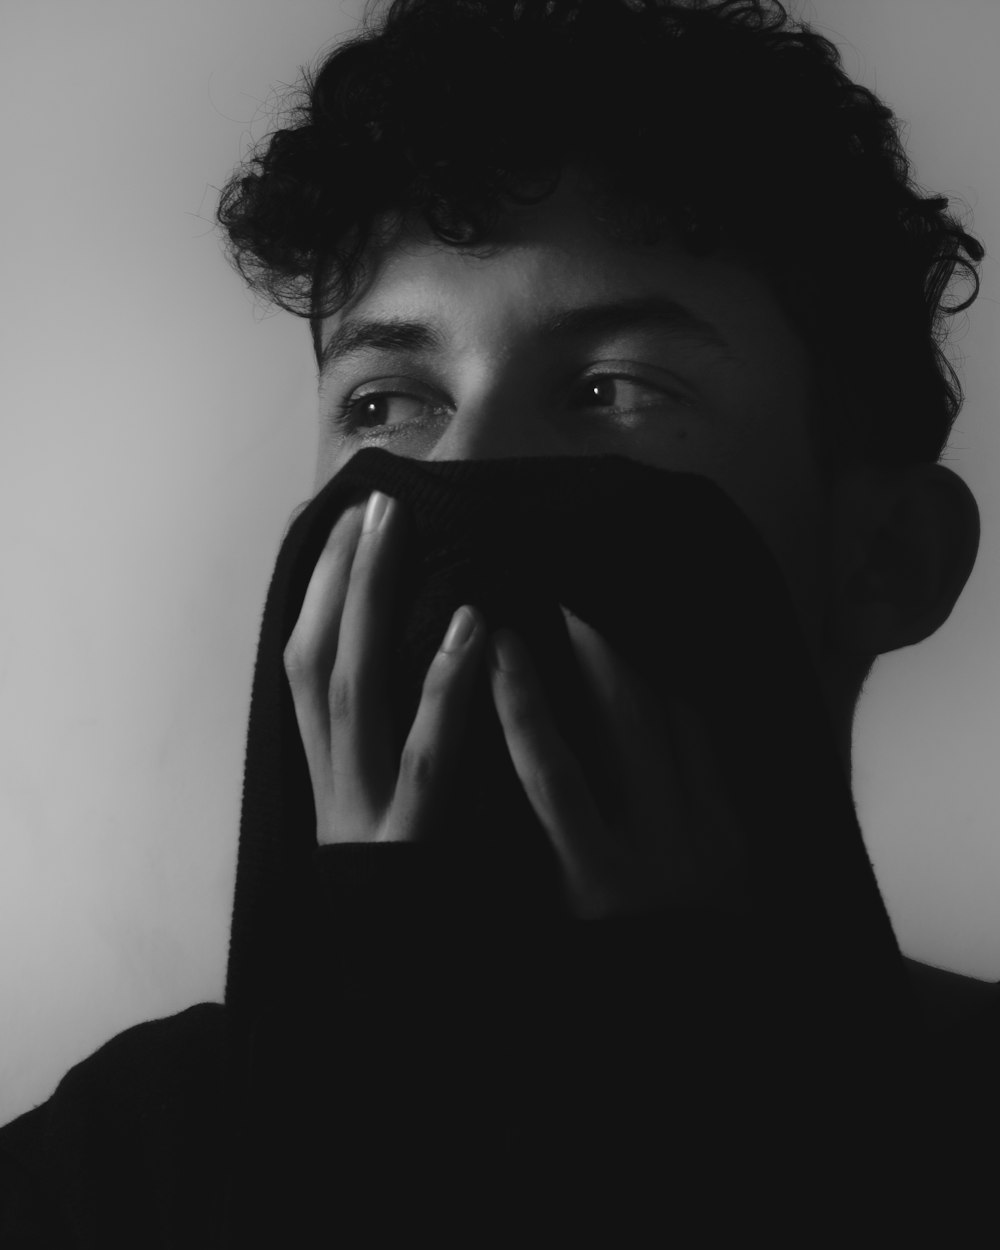 grayscale photo of woman covering her face